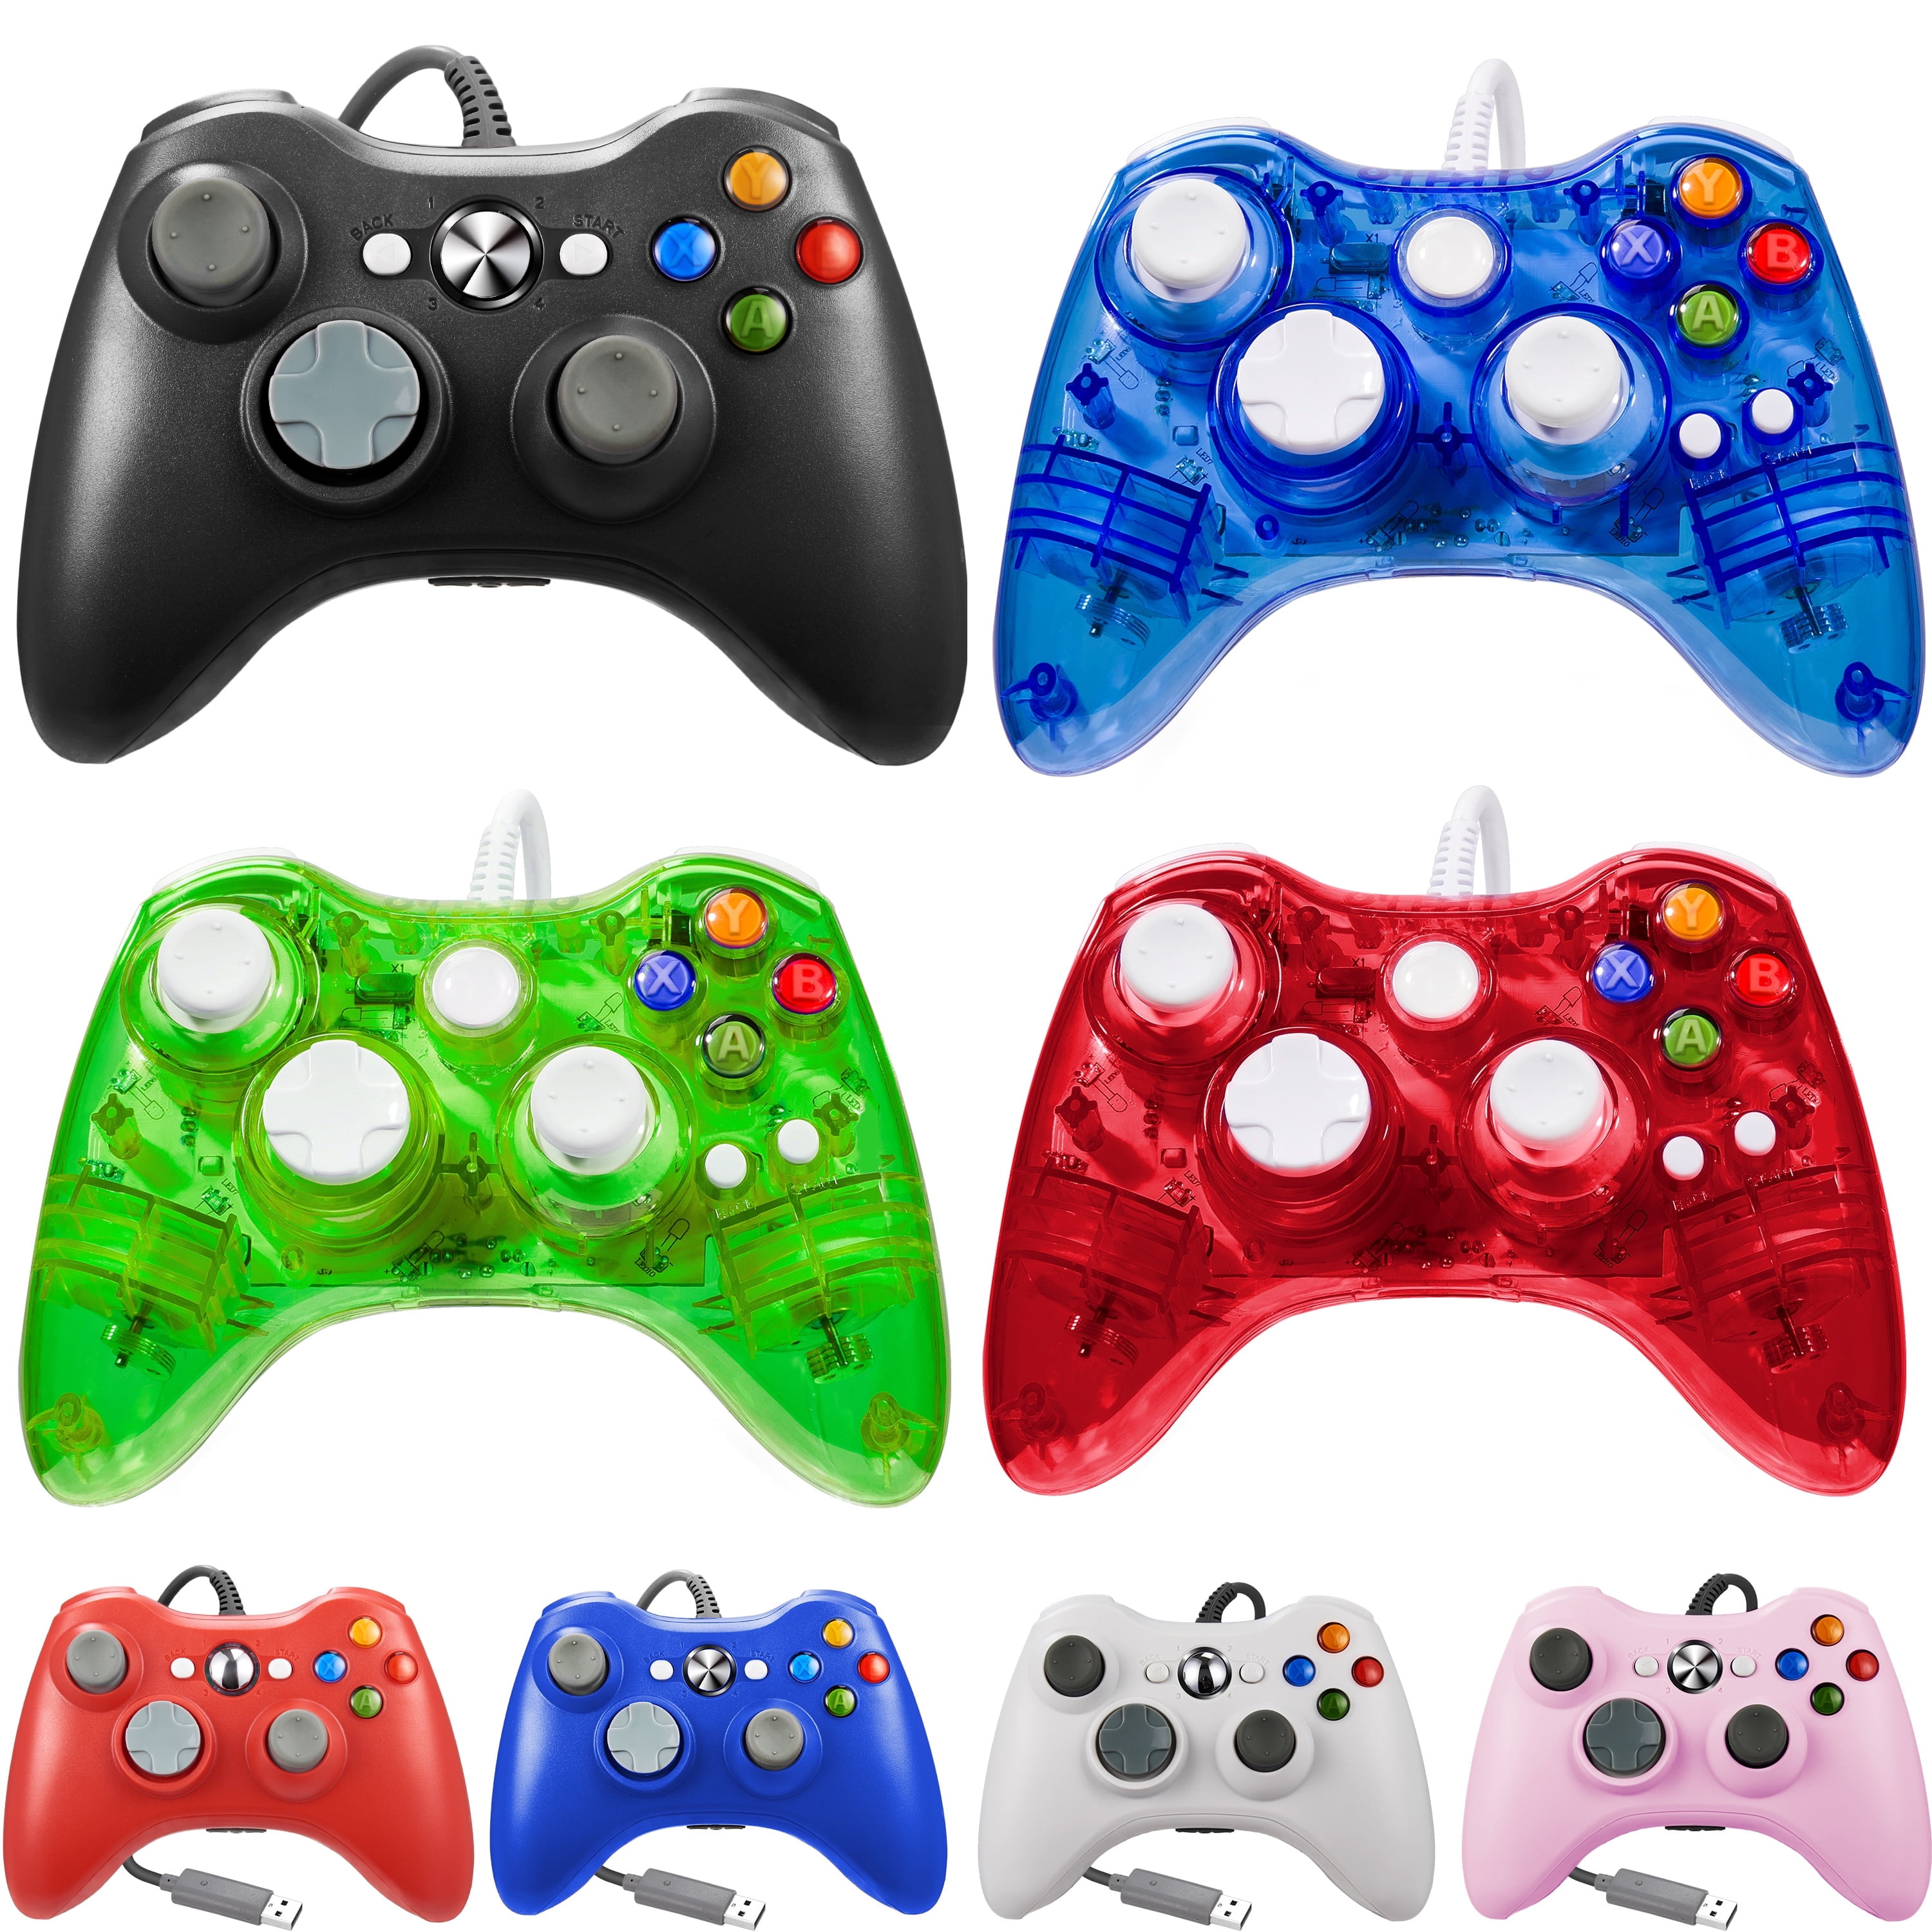 Luxmo Wired Xbox 360 Controller Gamepad Joystick Compatible with